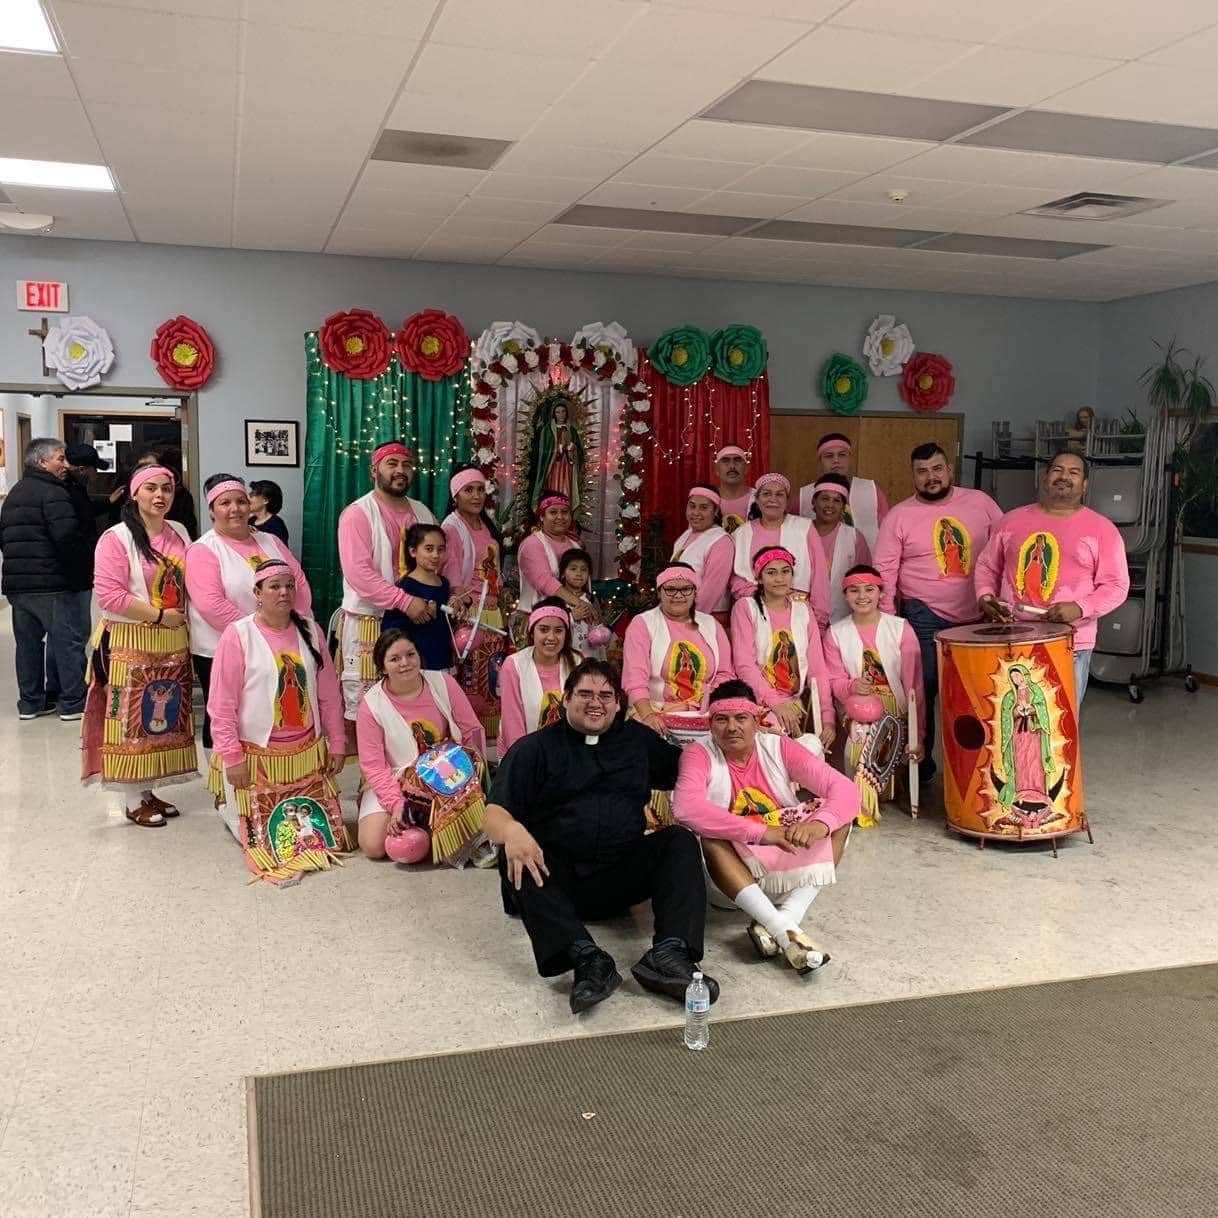 Danz Folklorio with Father Guillermo